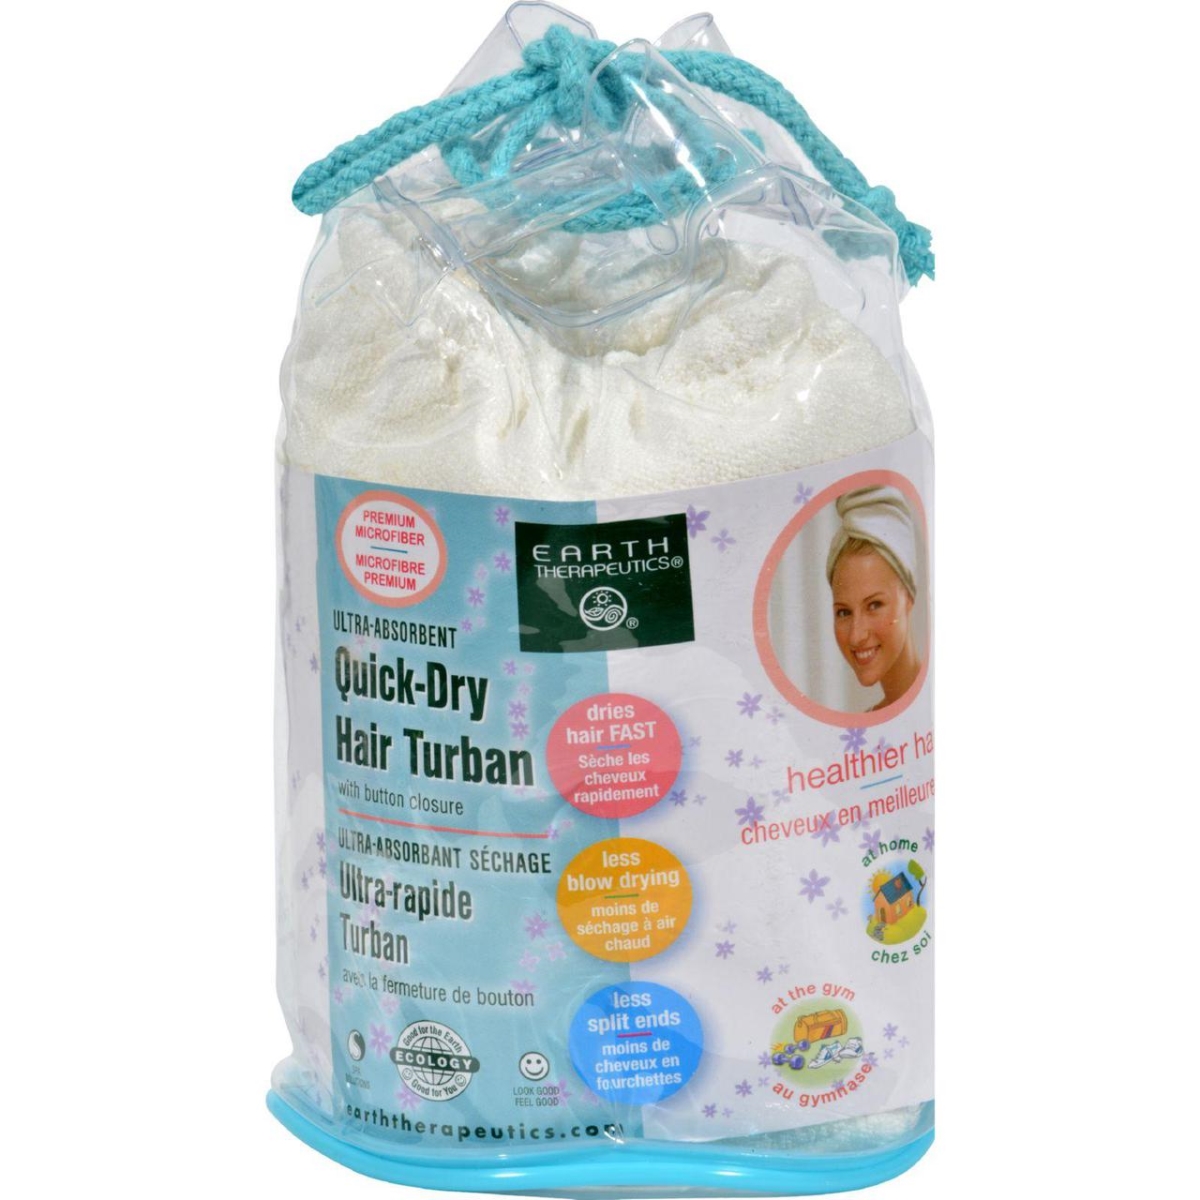 Quick Dry Hair Turban Ultra-absorbent